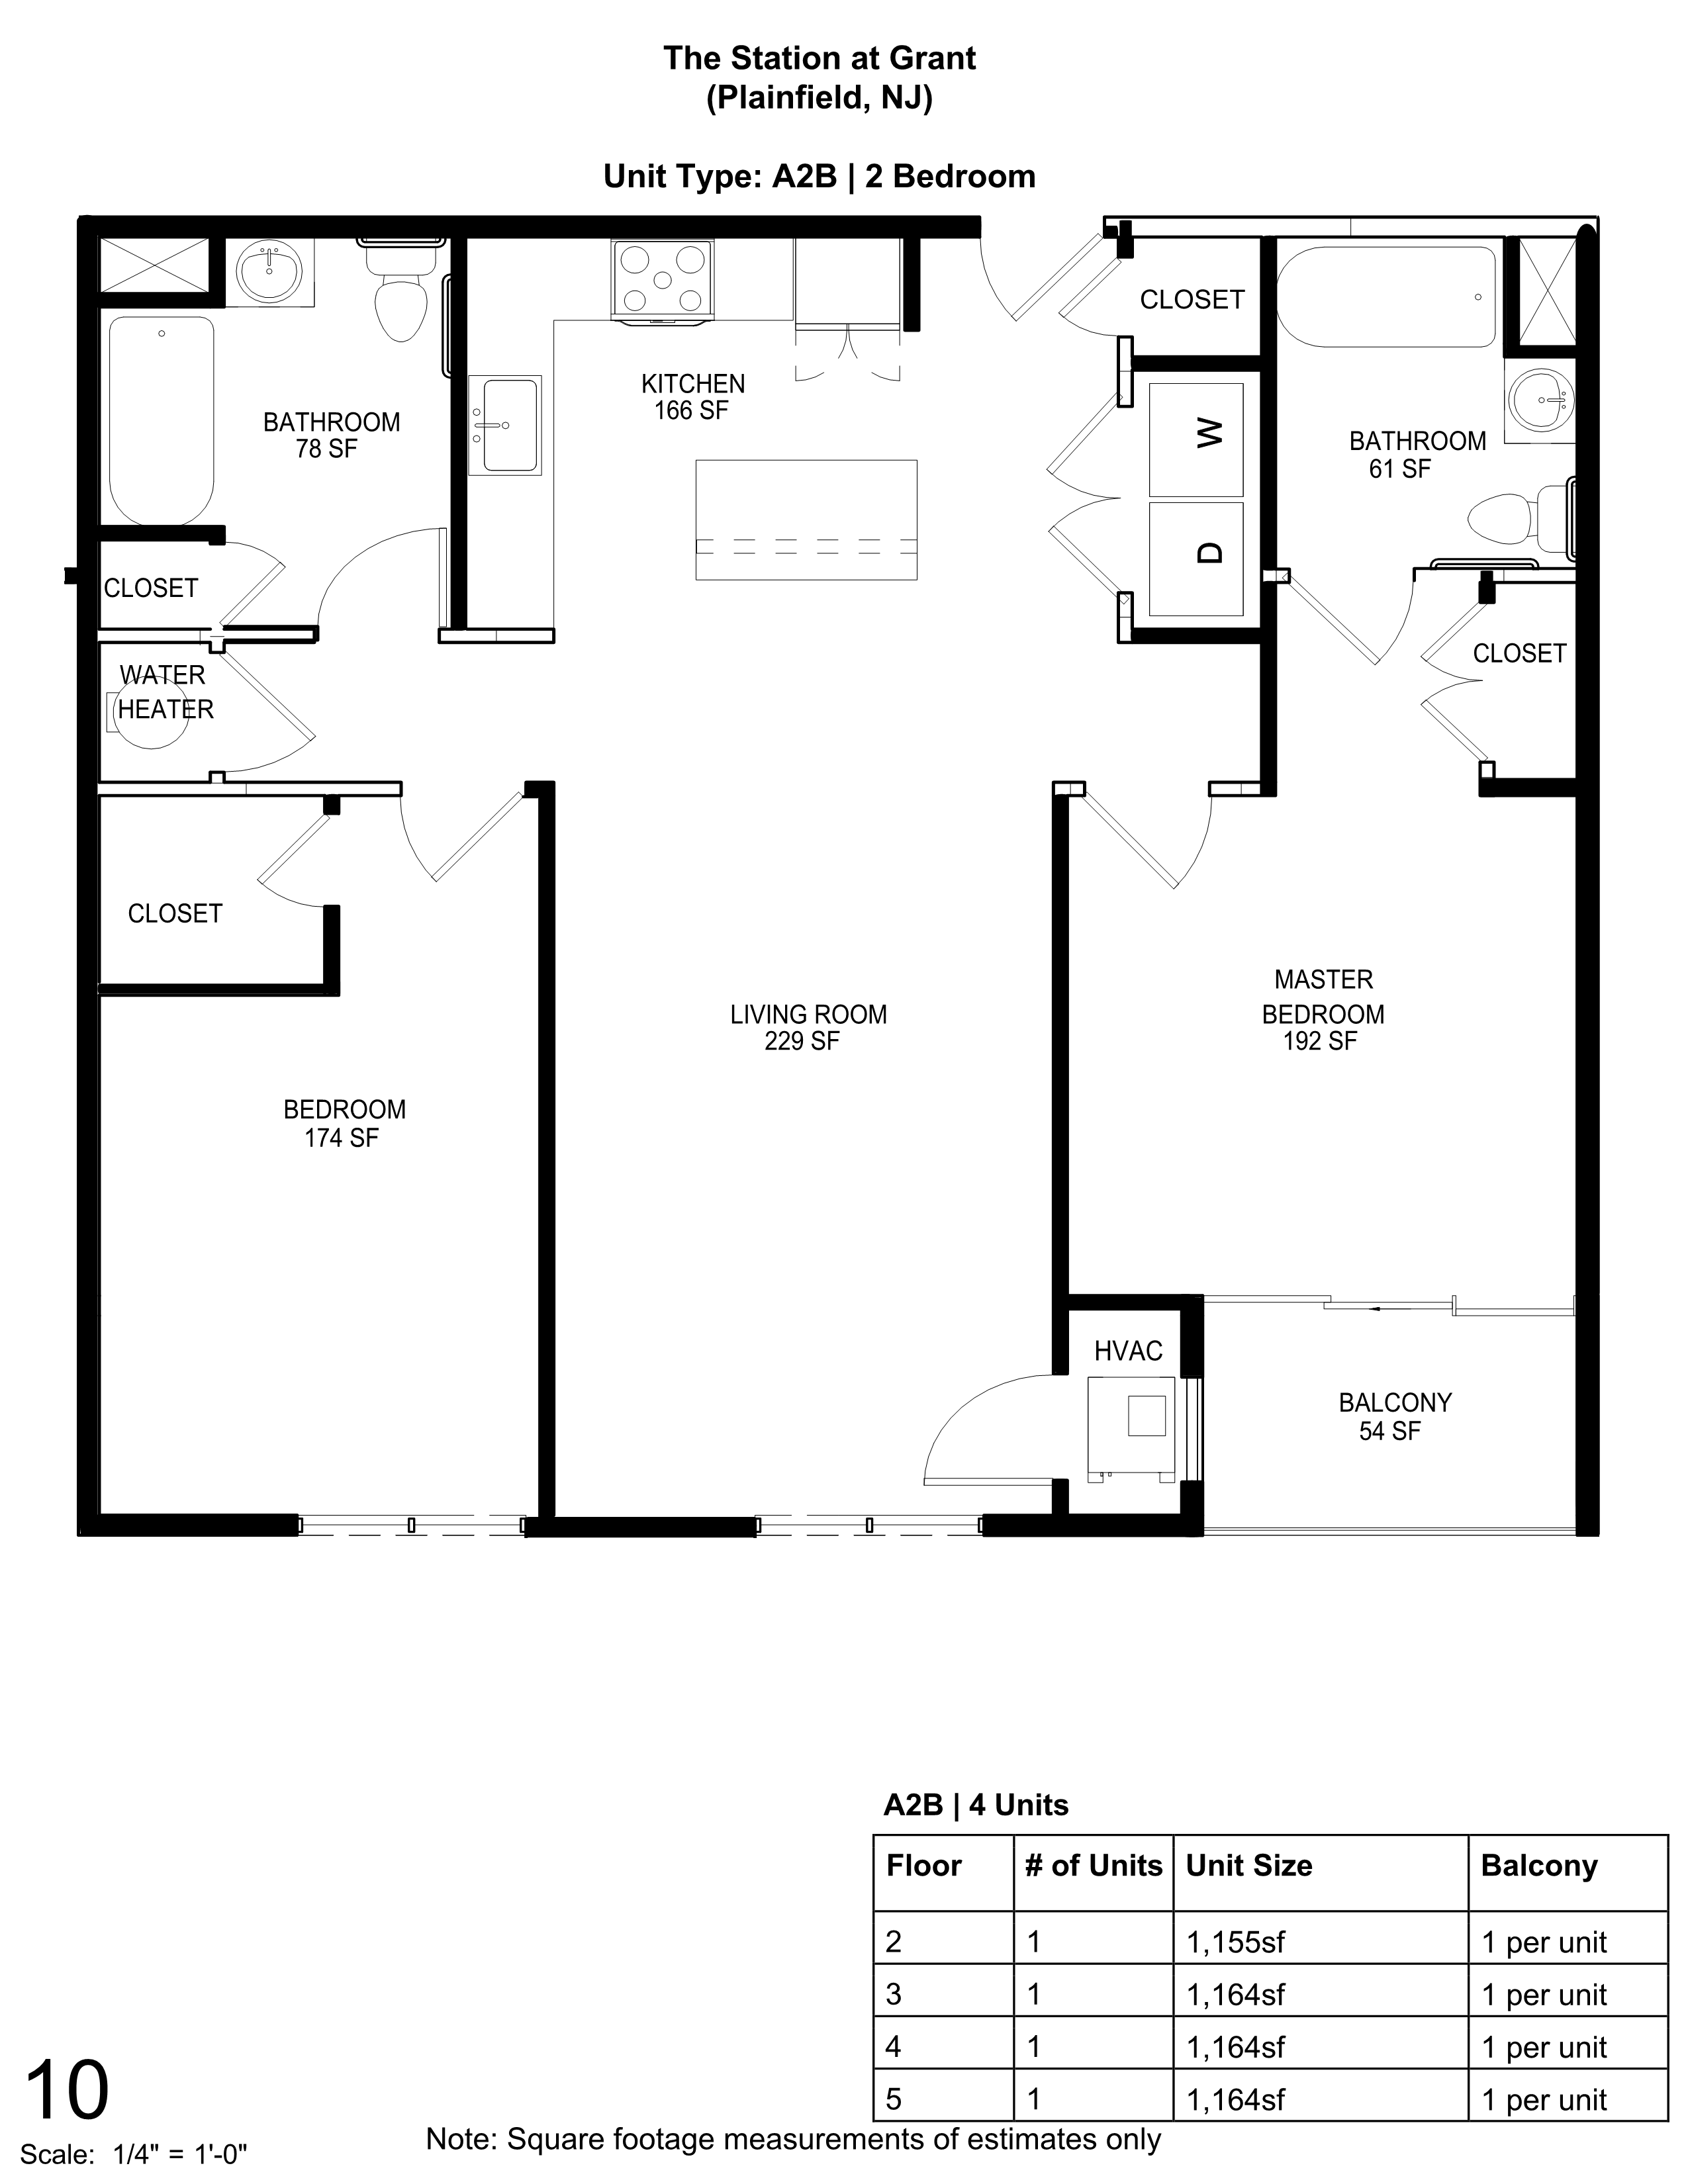 Floor Plans of The Station at Grant Avenue in Plainfield, NJ